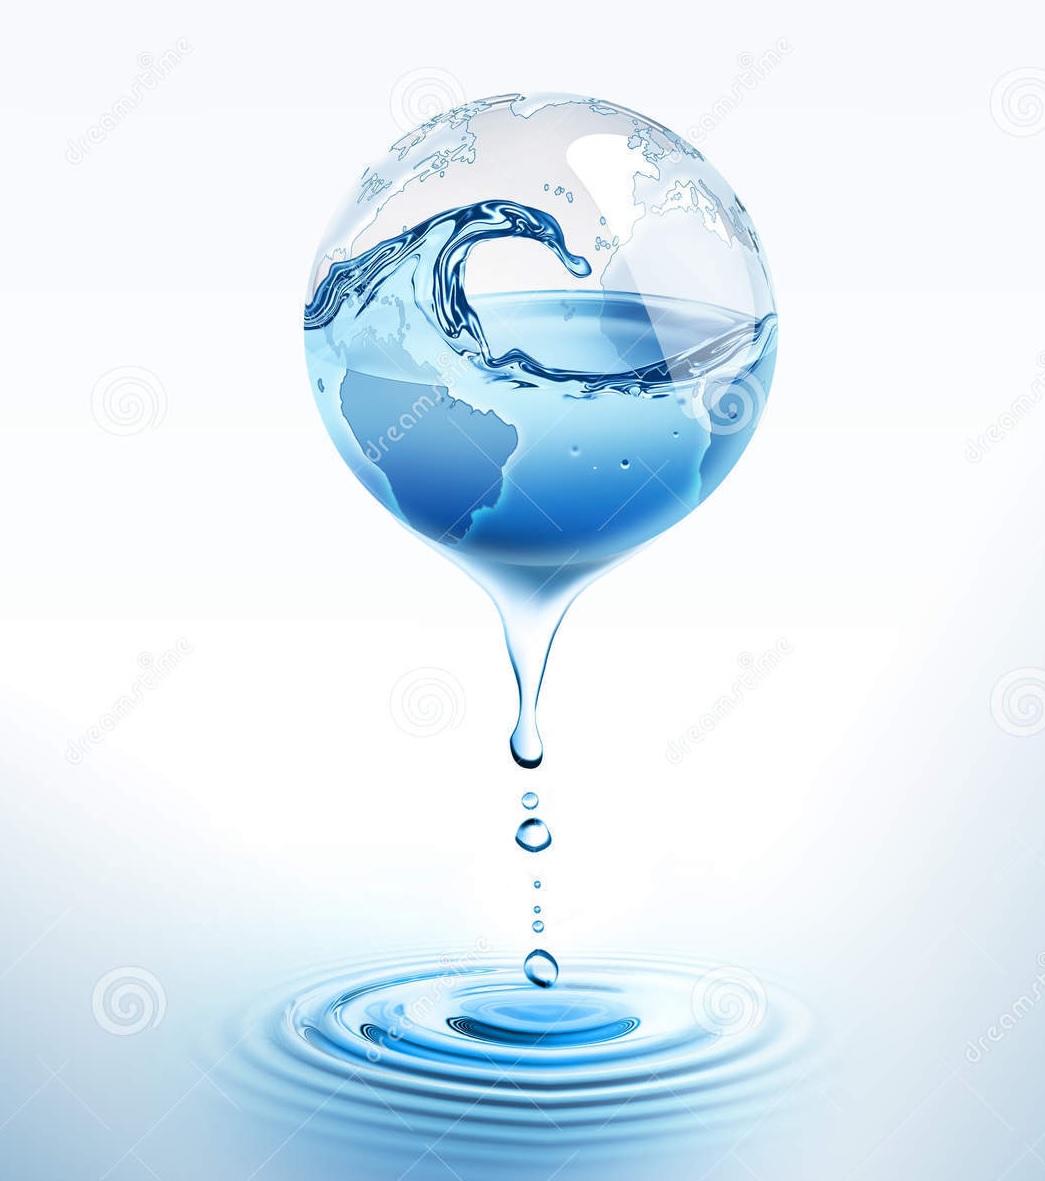 Hello everyoneHope you are doing wellI&rsquo;m researcher and consultant in hydraulic and water environmentYou are welcome for all kind of exchange ...